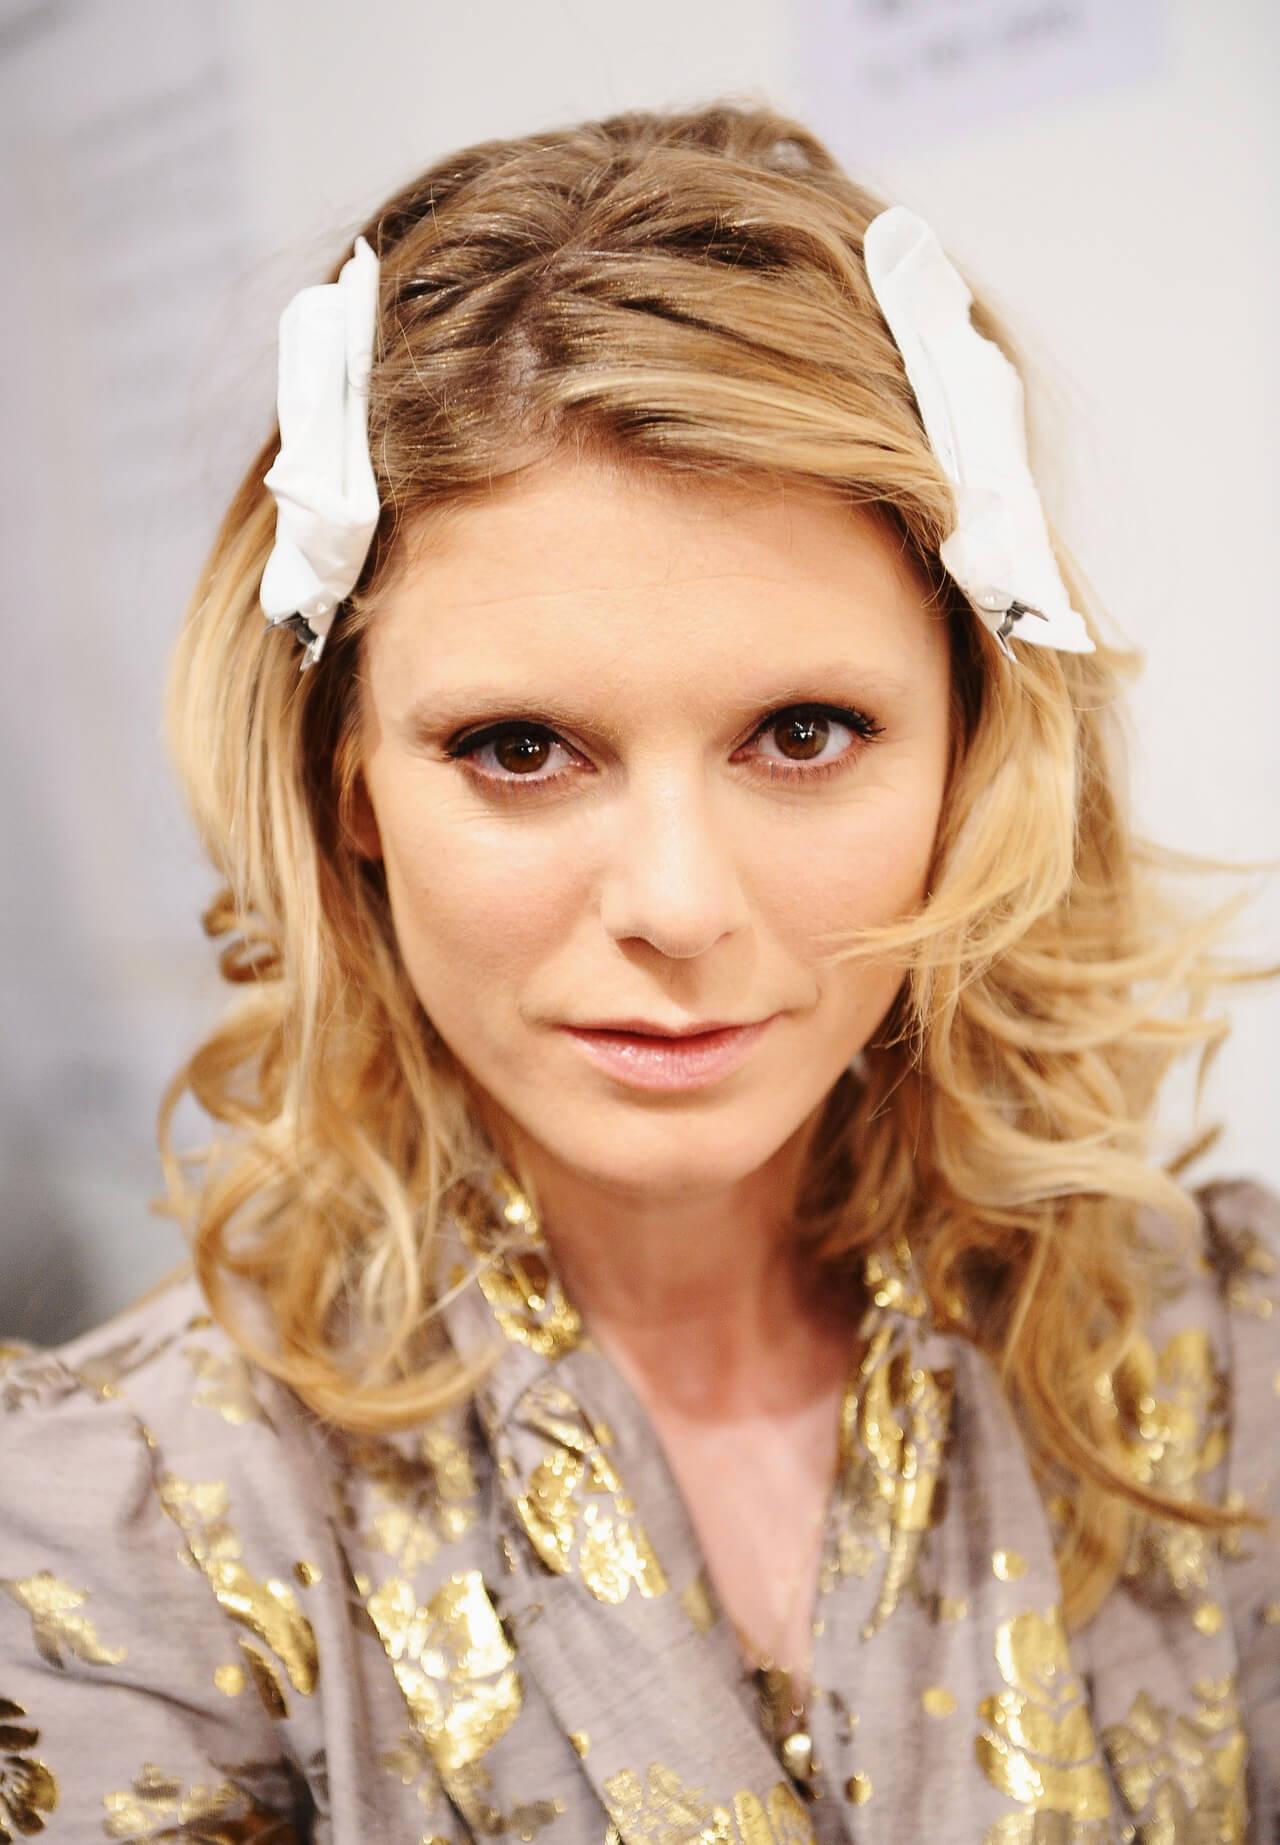 49 Hot Pictures Of Emilia Fox Will Drive You Insane For Her | Best Of Comic Books